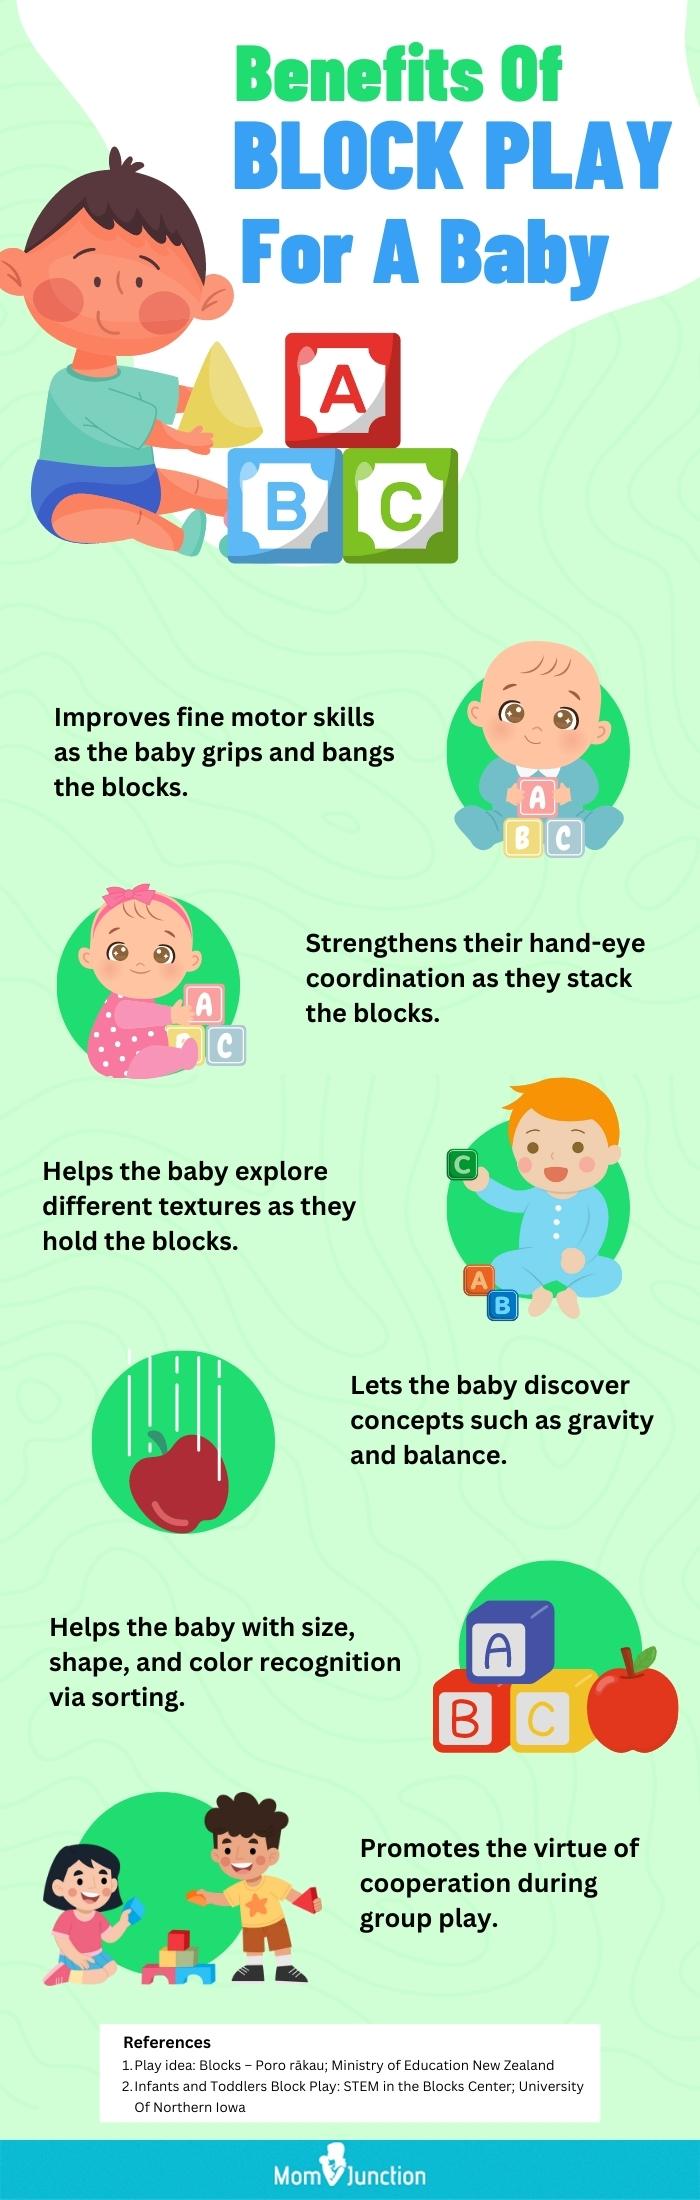 Benefits Of Block Play For A Baby (infographic)